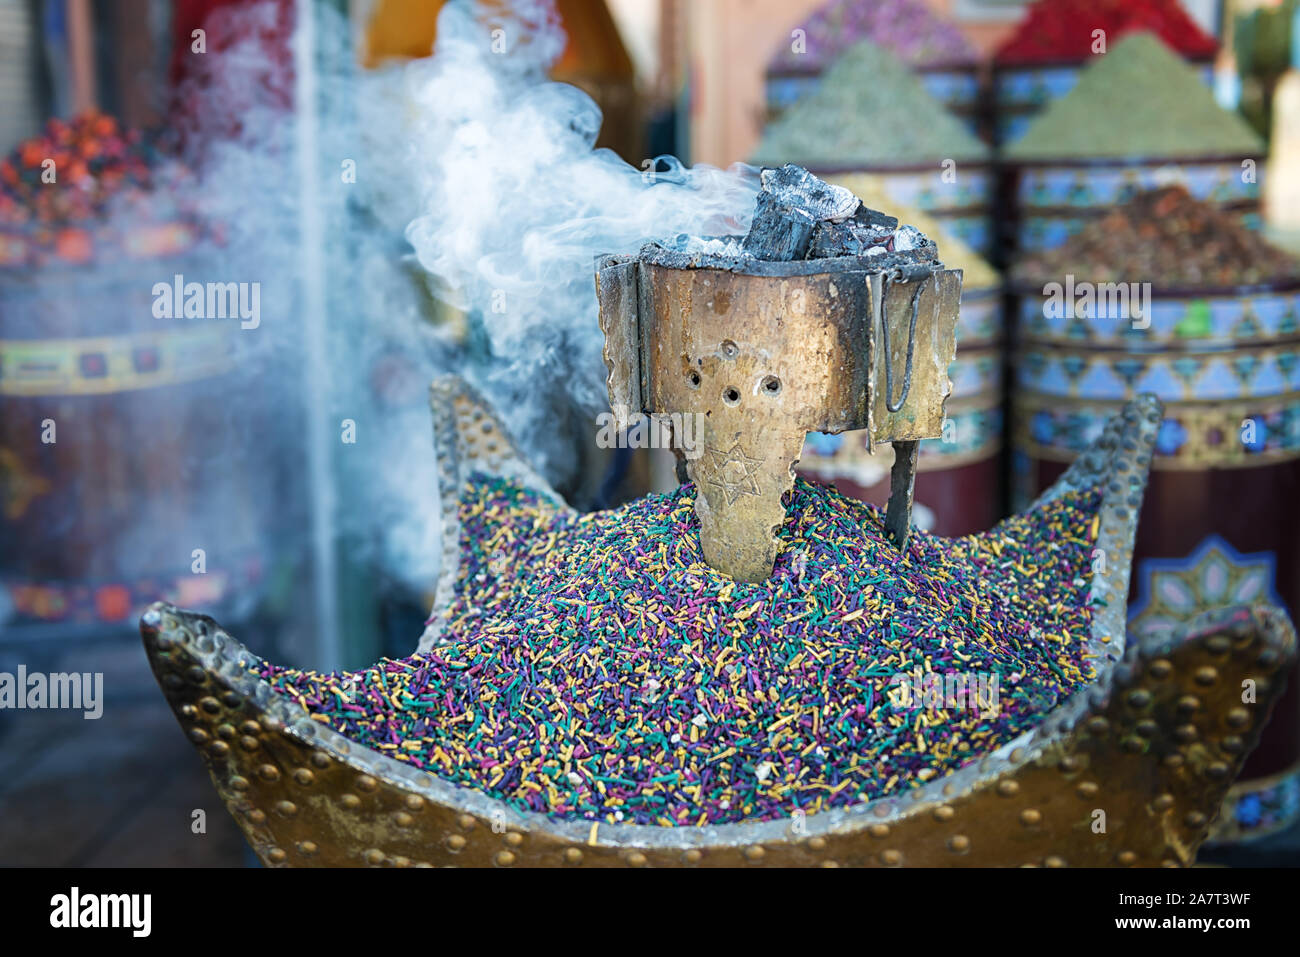 Incense burning on coal in the medina of Marrakech, Morocco. Stock Photo